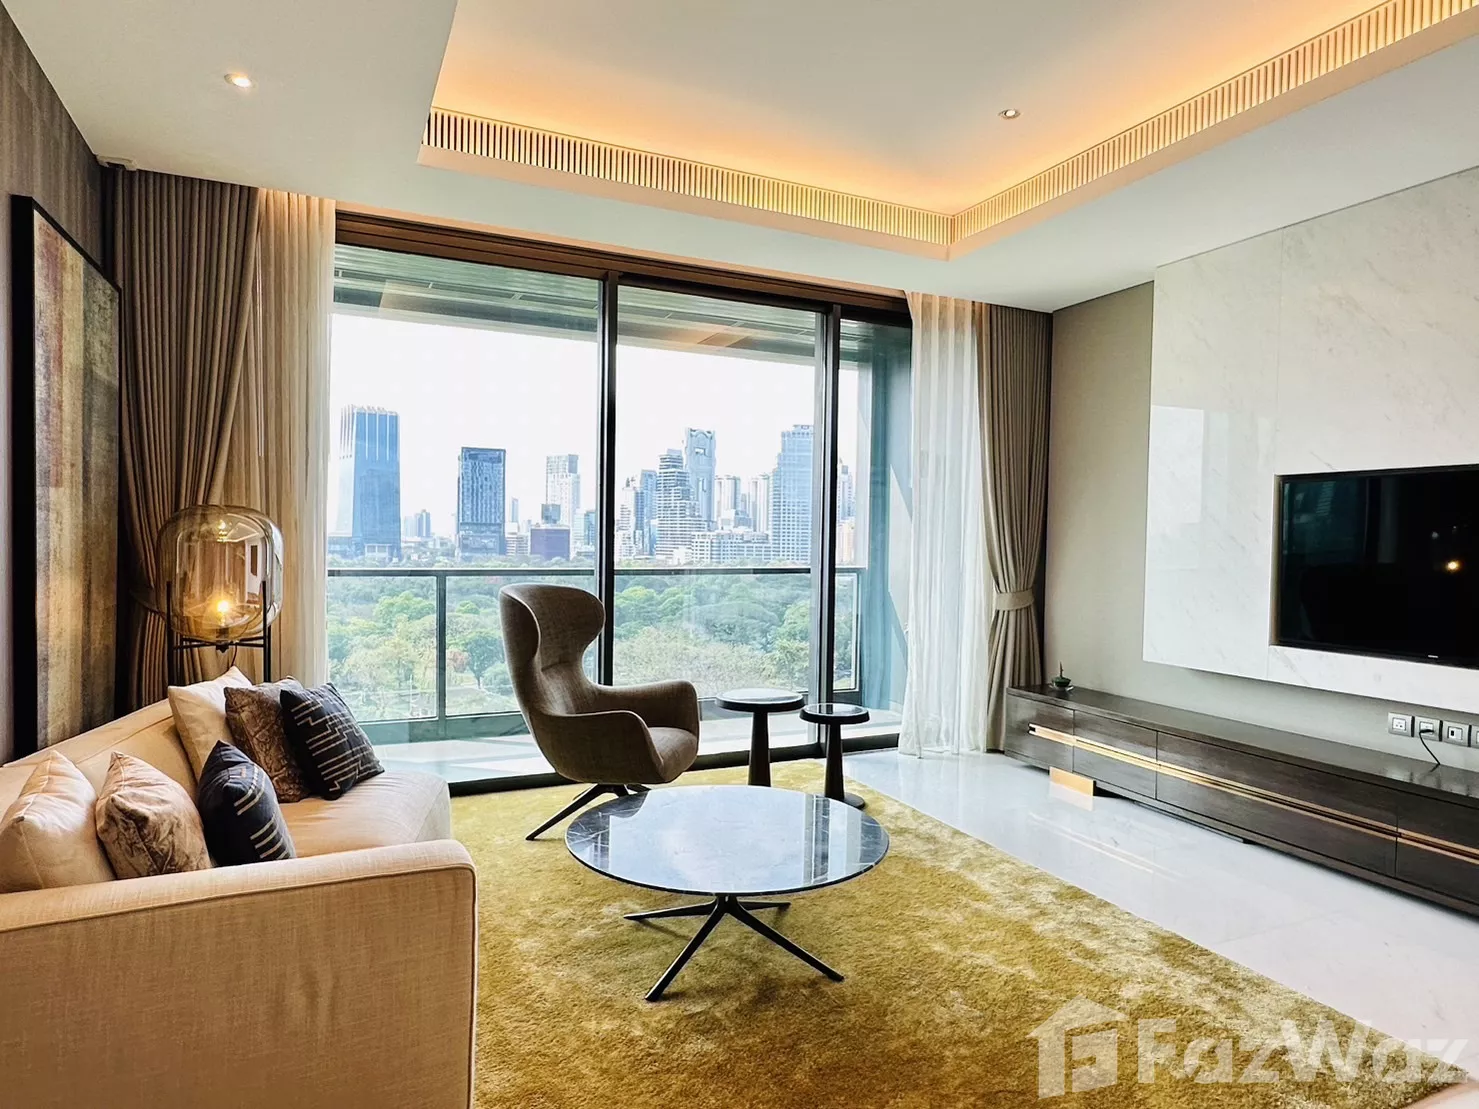 The best 1-bedroom condos for young professionals in Bangkok